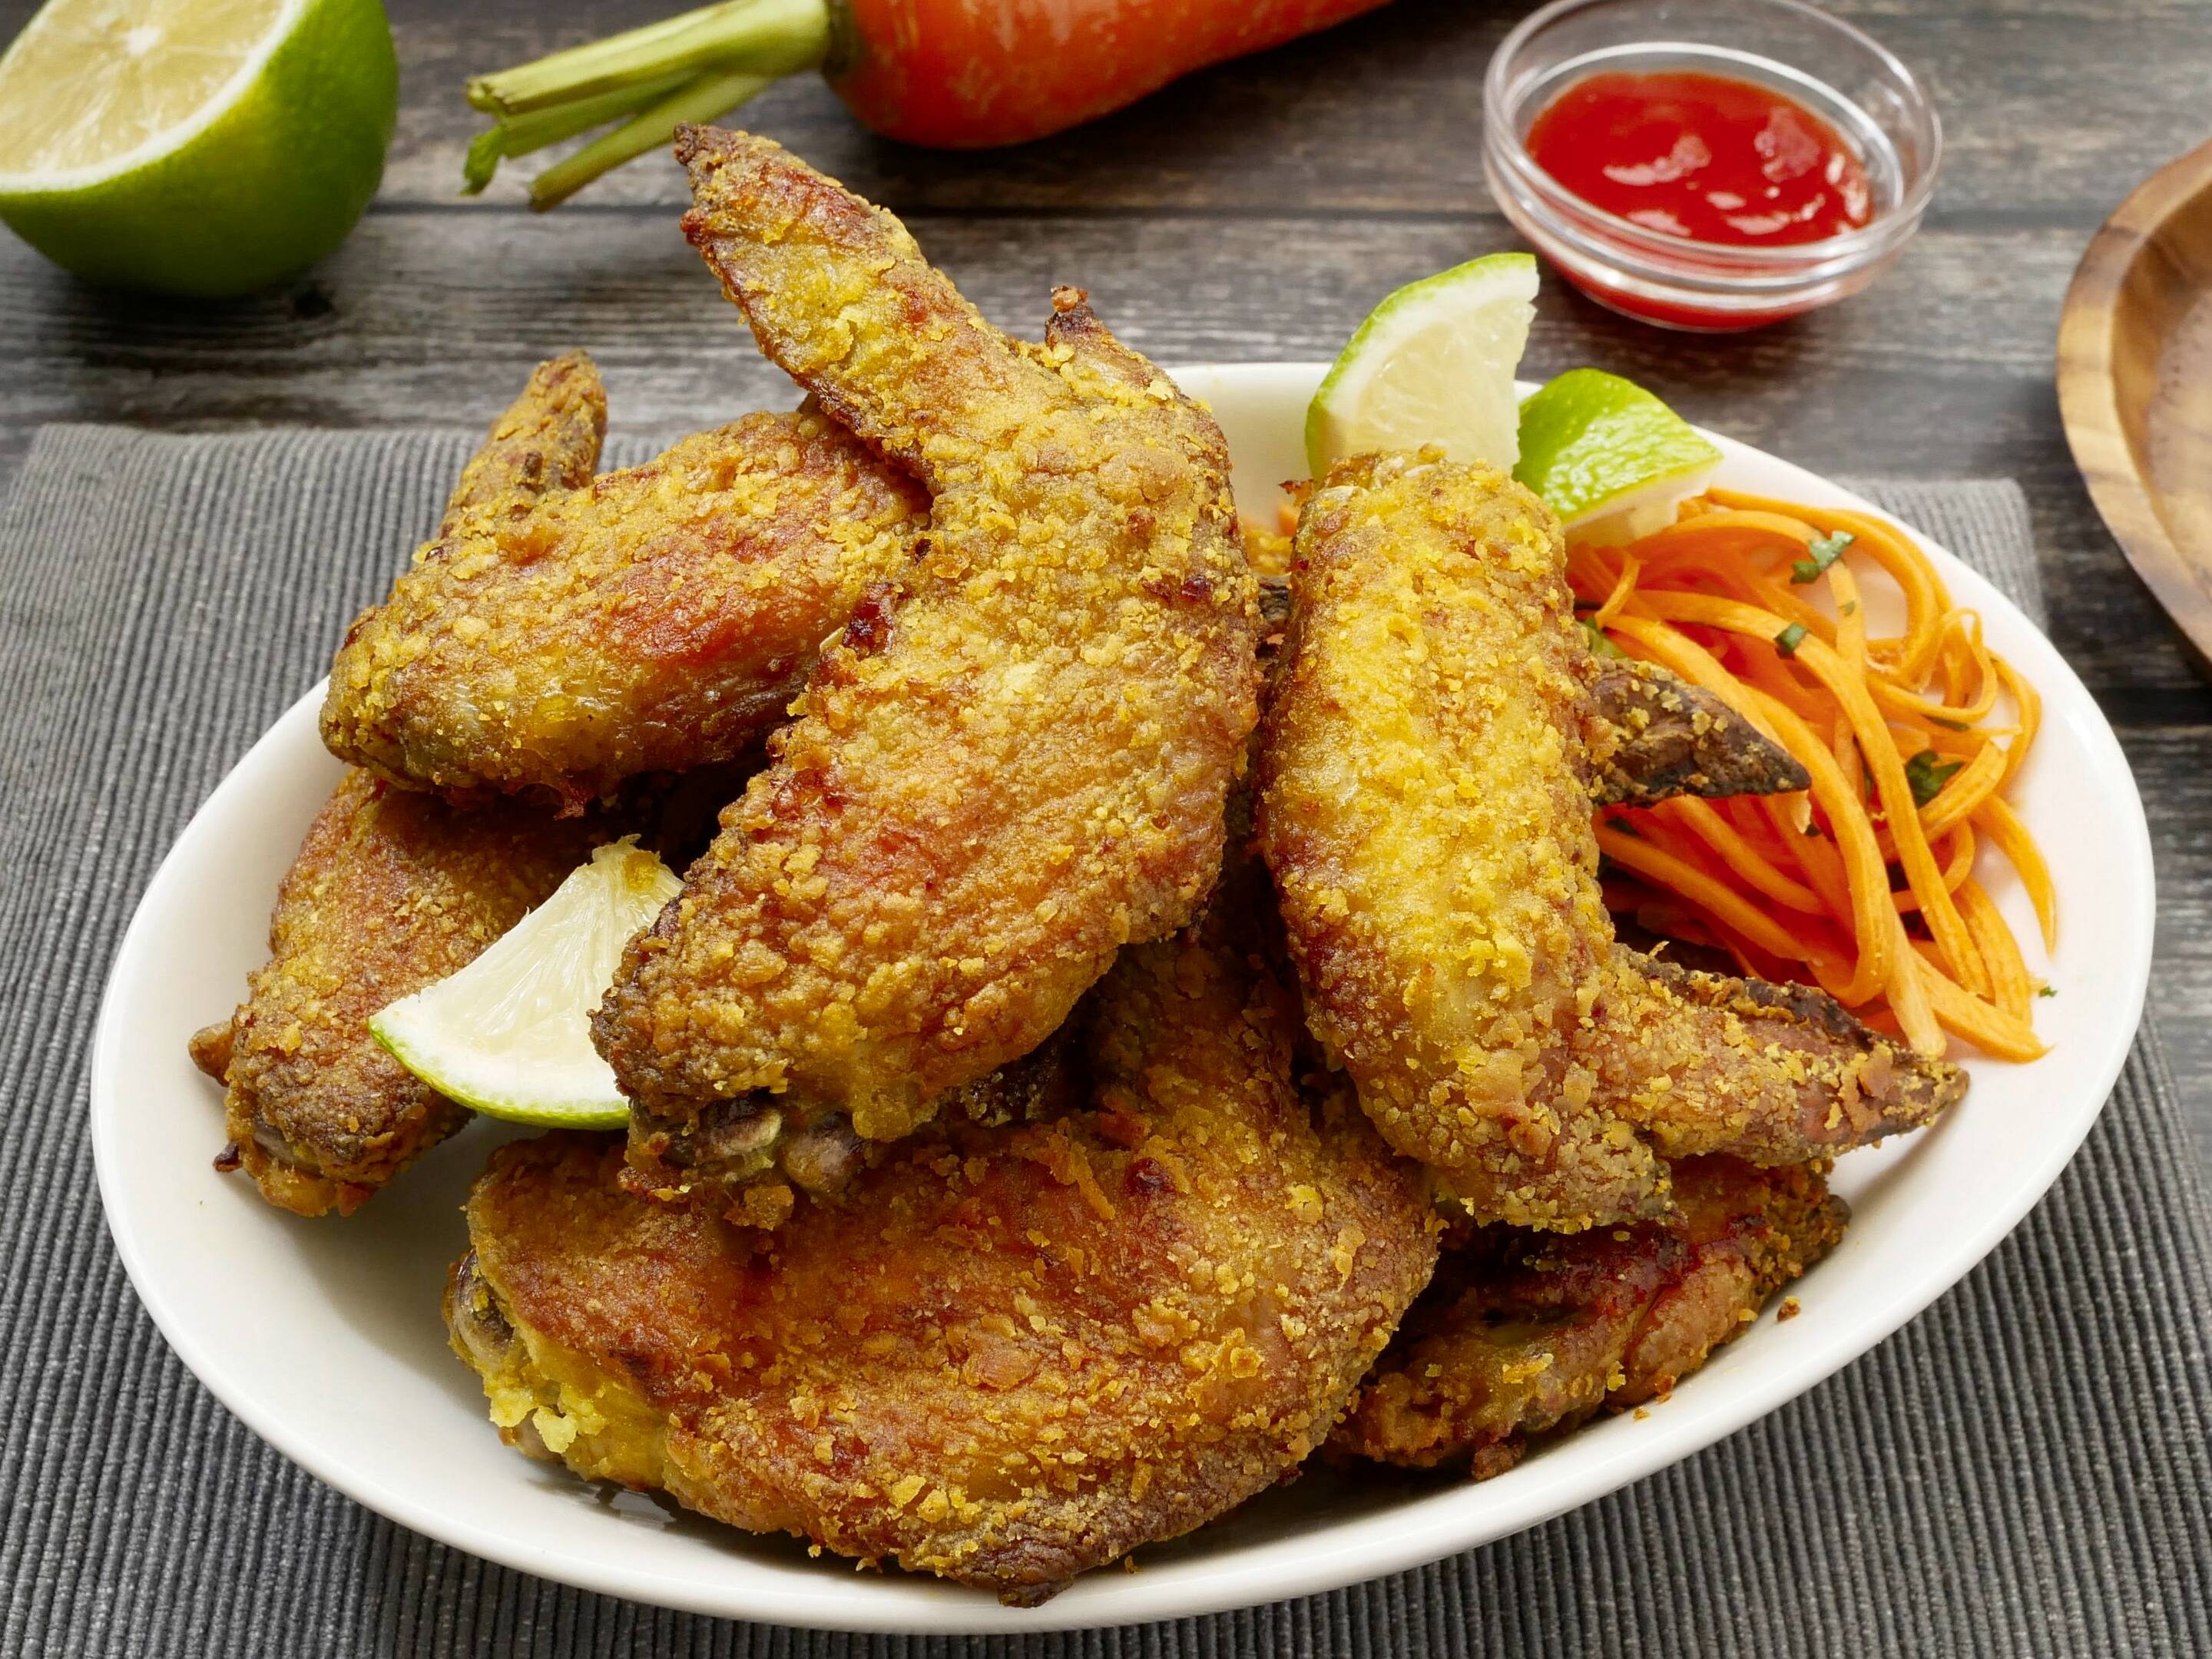 Crispy and juicy fried chicken dishes are easy to serve